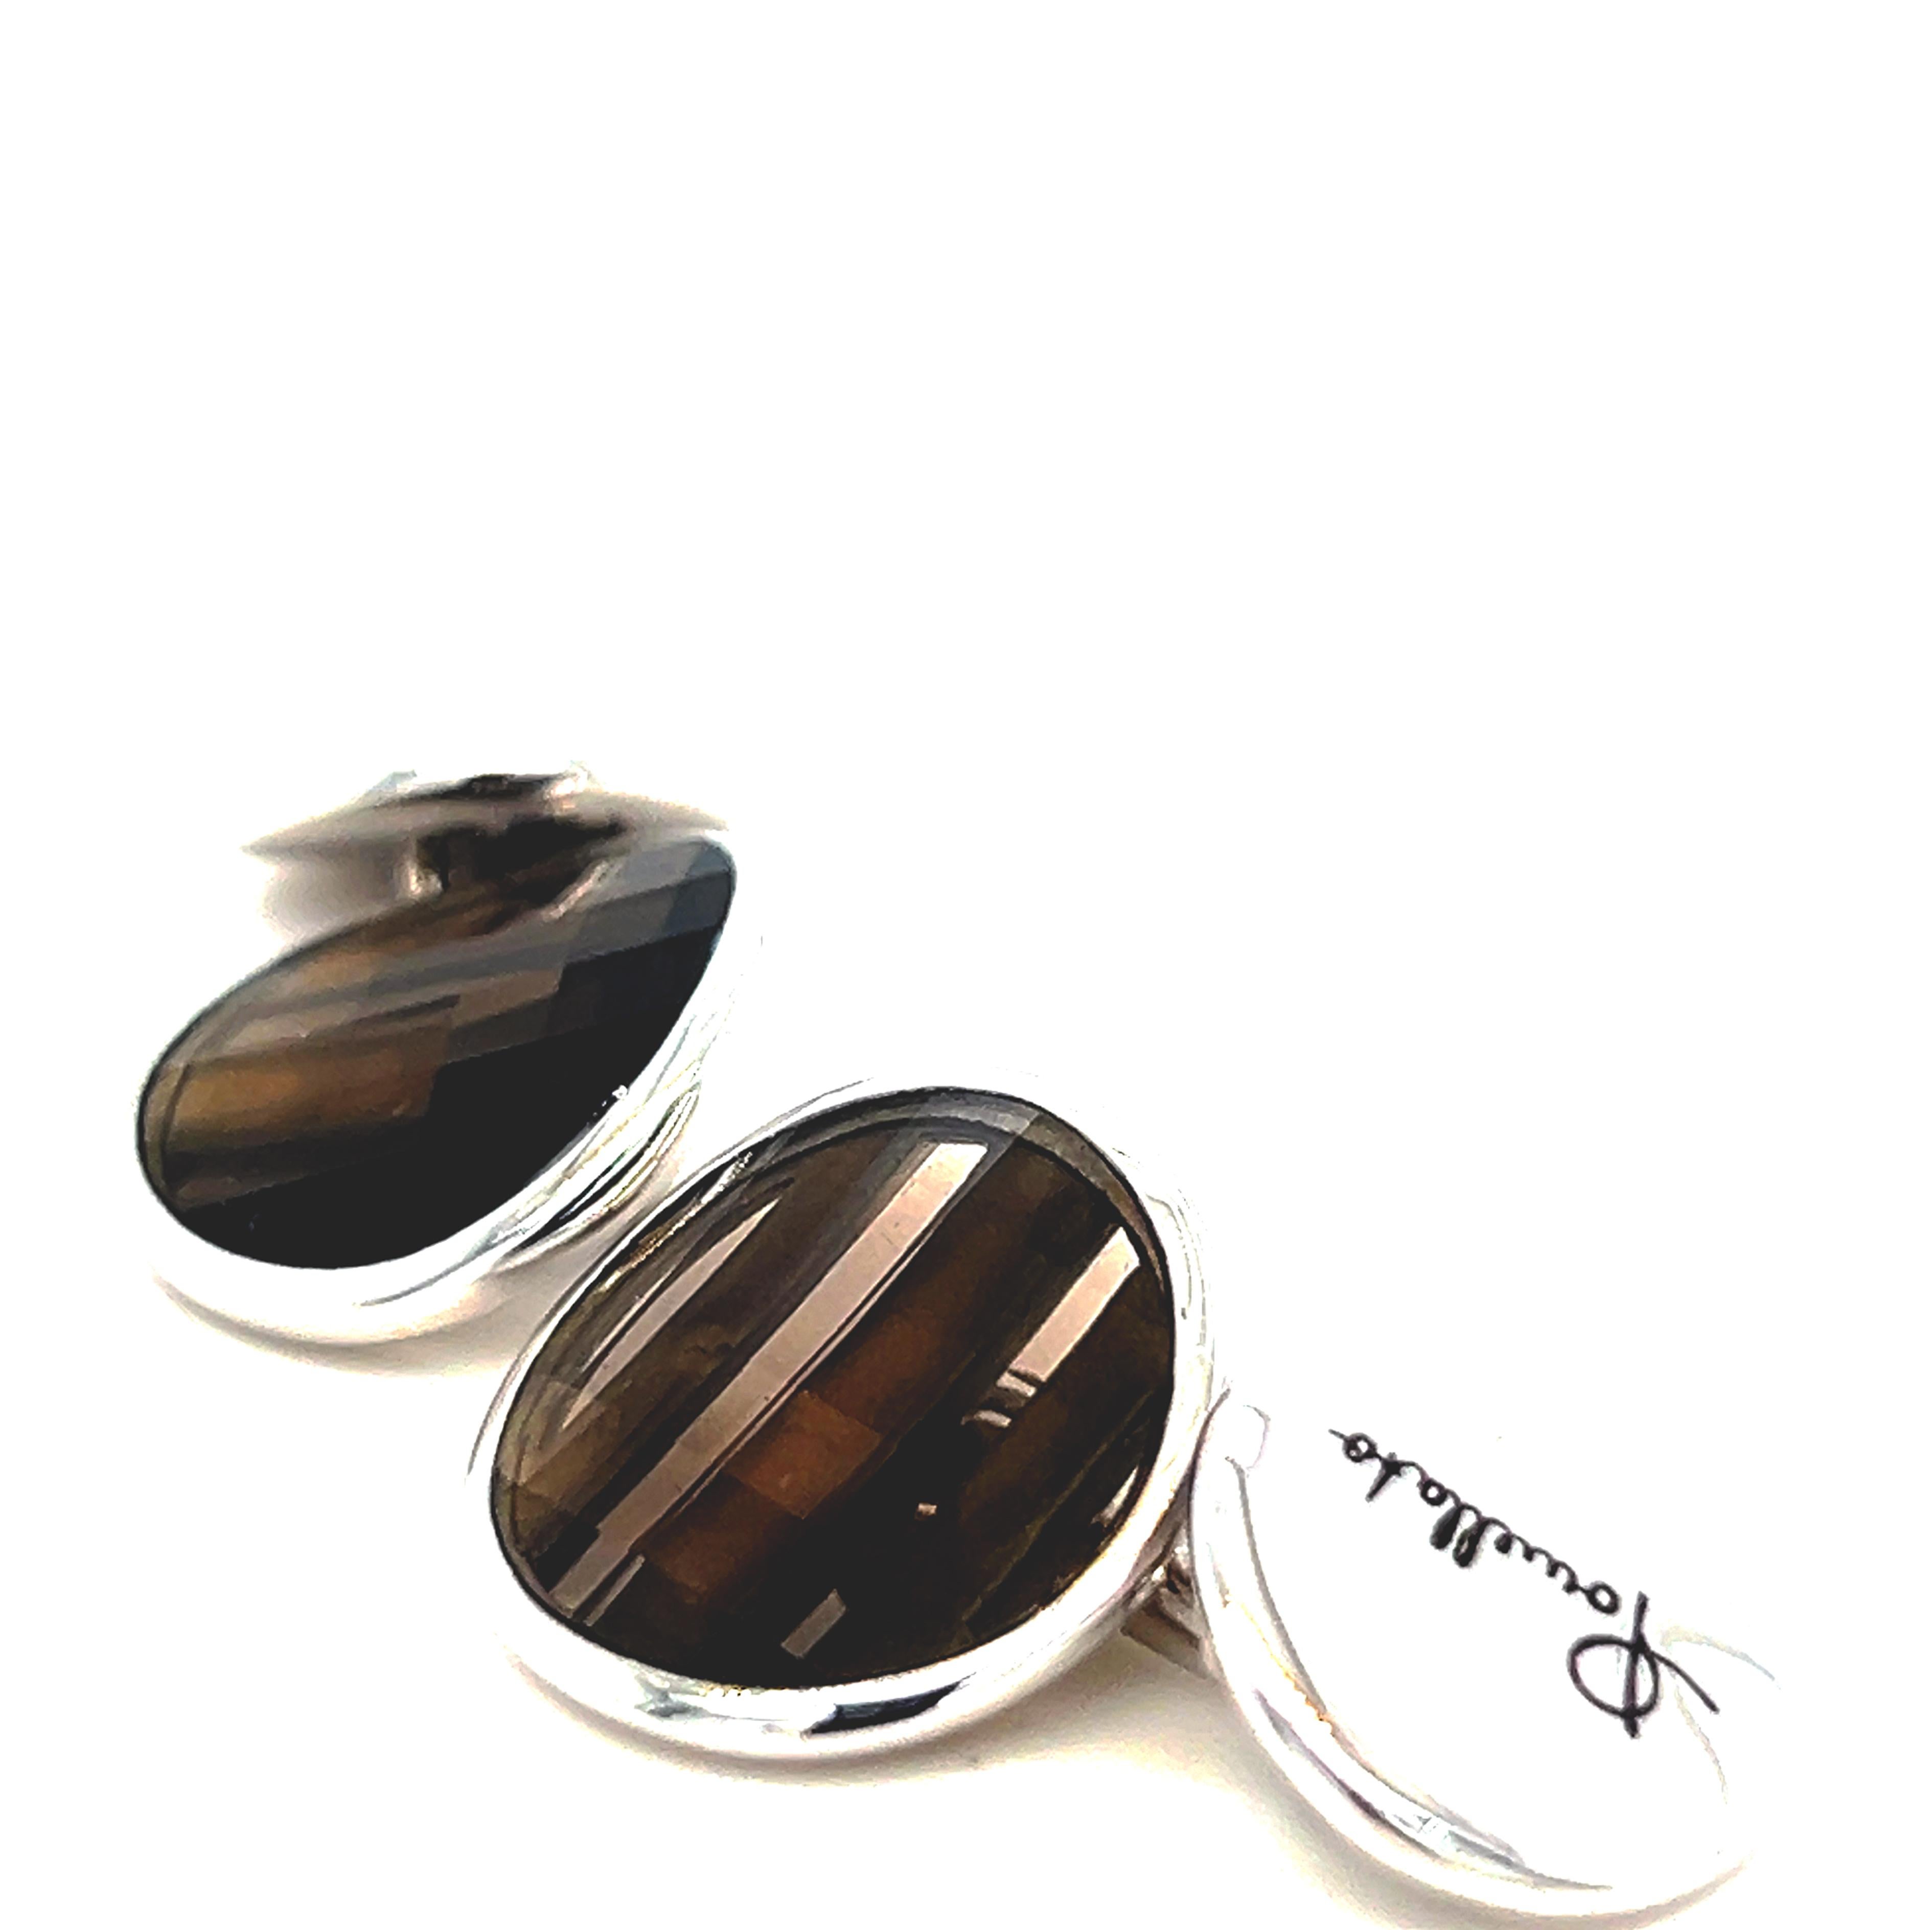 Original 2012, Faceted Smoky Quartz Pomellato Cufflinks, Sterling Silver White Gold Plated Setting(G.A921/AG9/QF).
This extremely versatile, wearable piece is perfect with any attire: Handcrafted in Sterling Silver and then White Gold Plated with